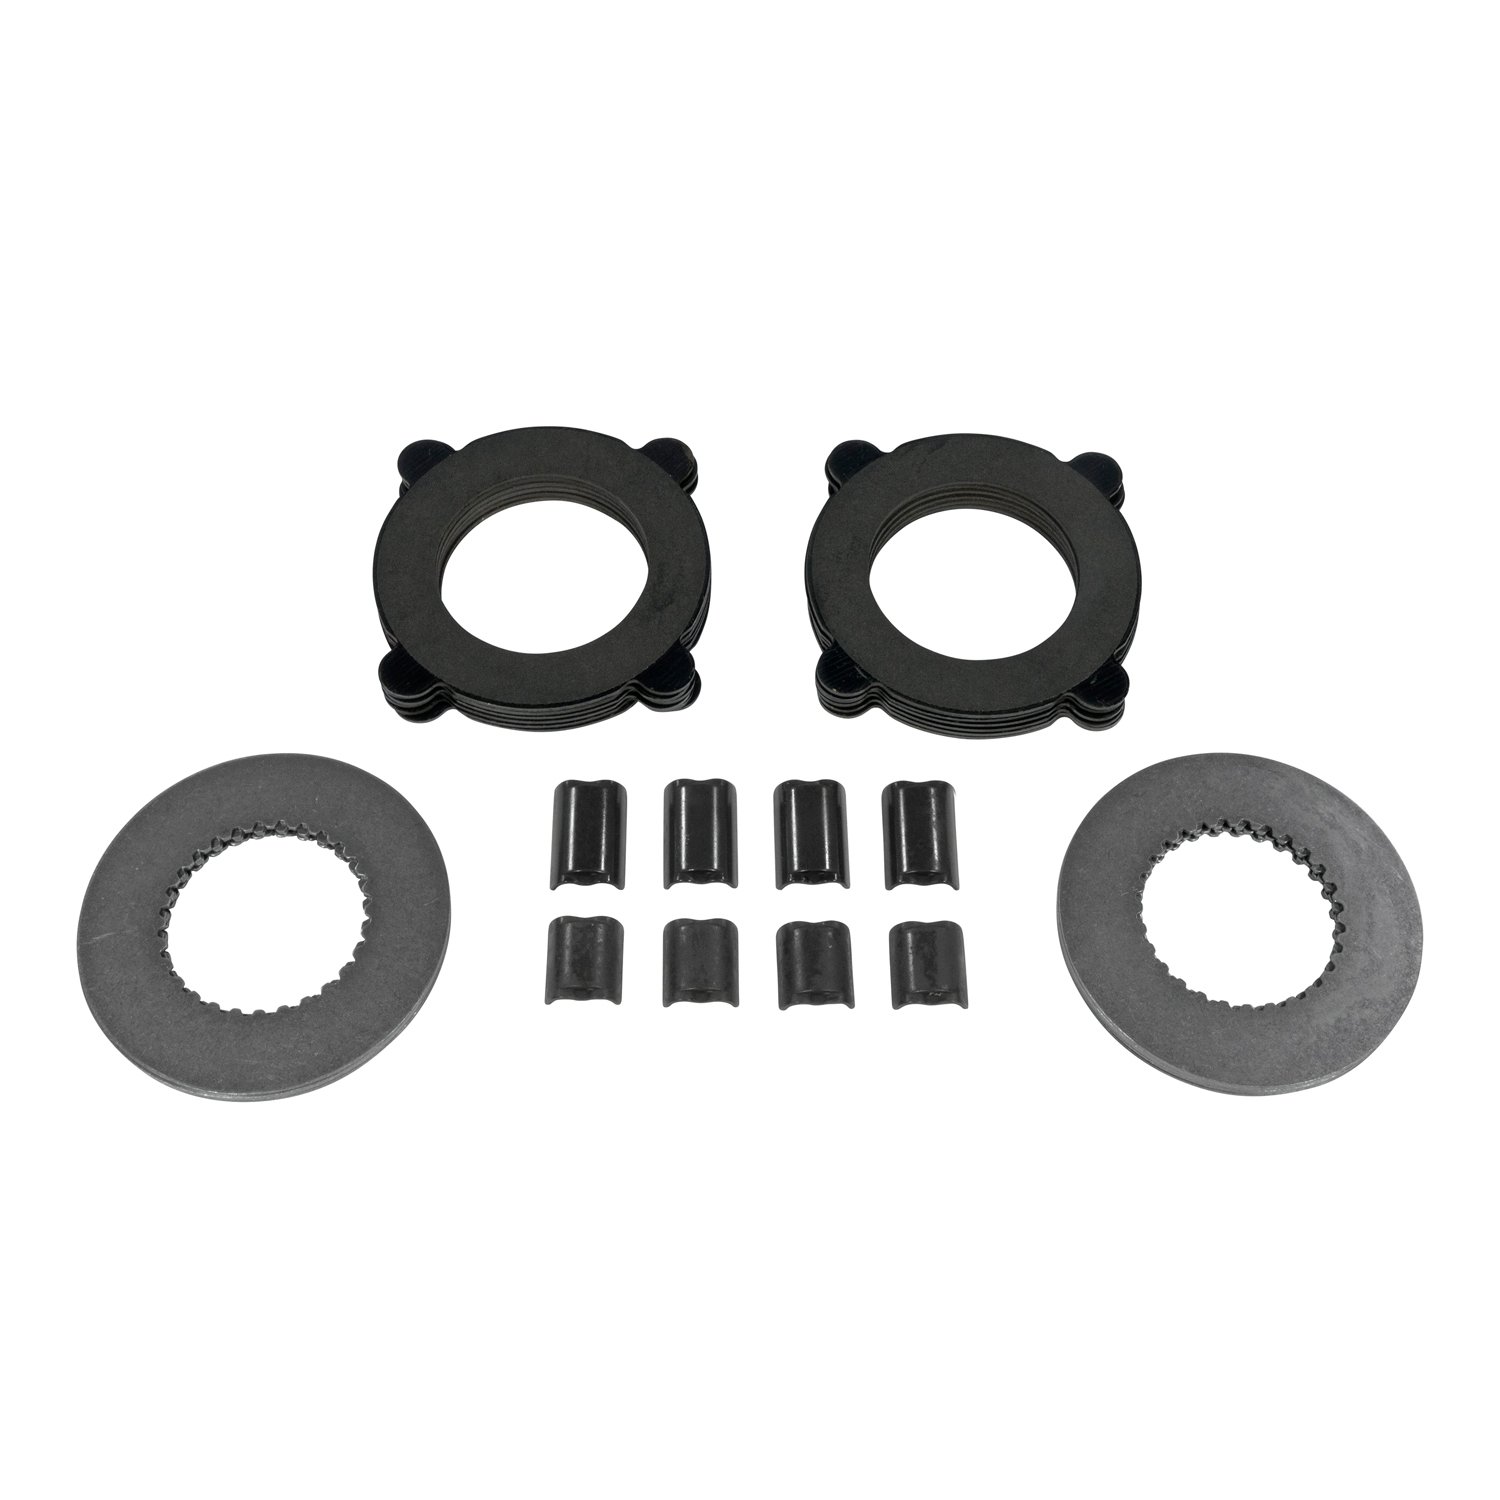 Dura Grip Clutch Kit For Chrysler/Aam 11.5 in.